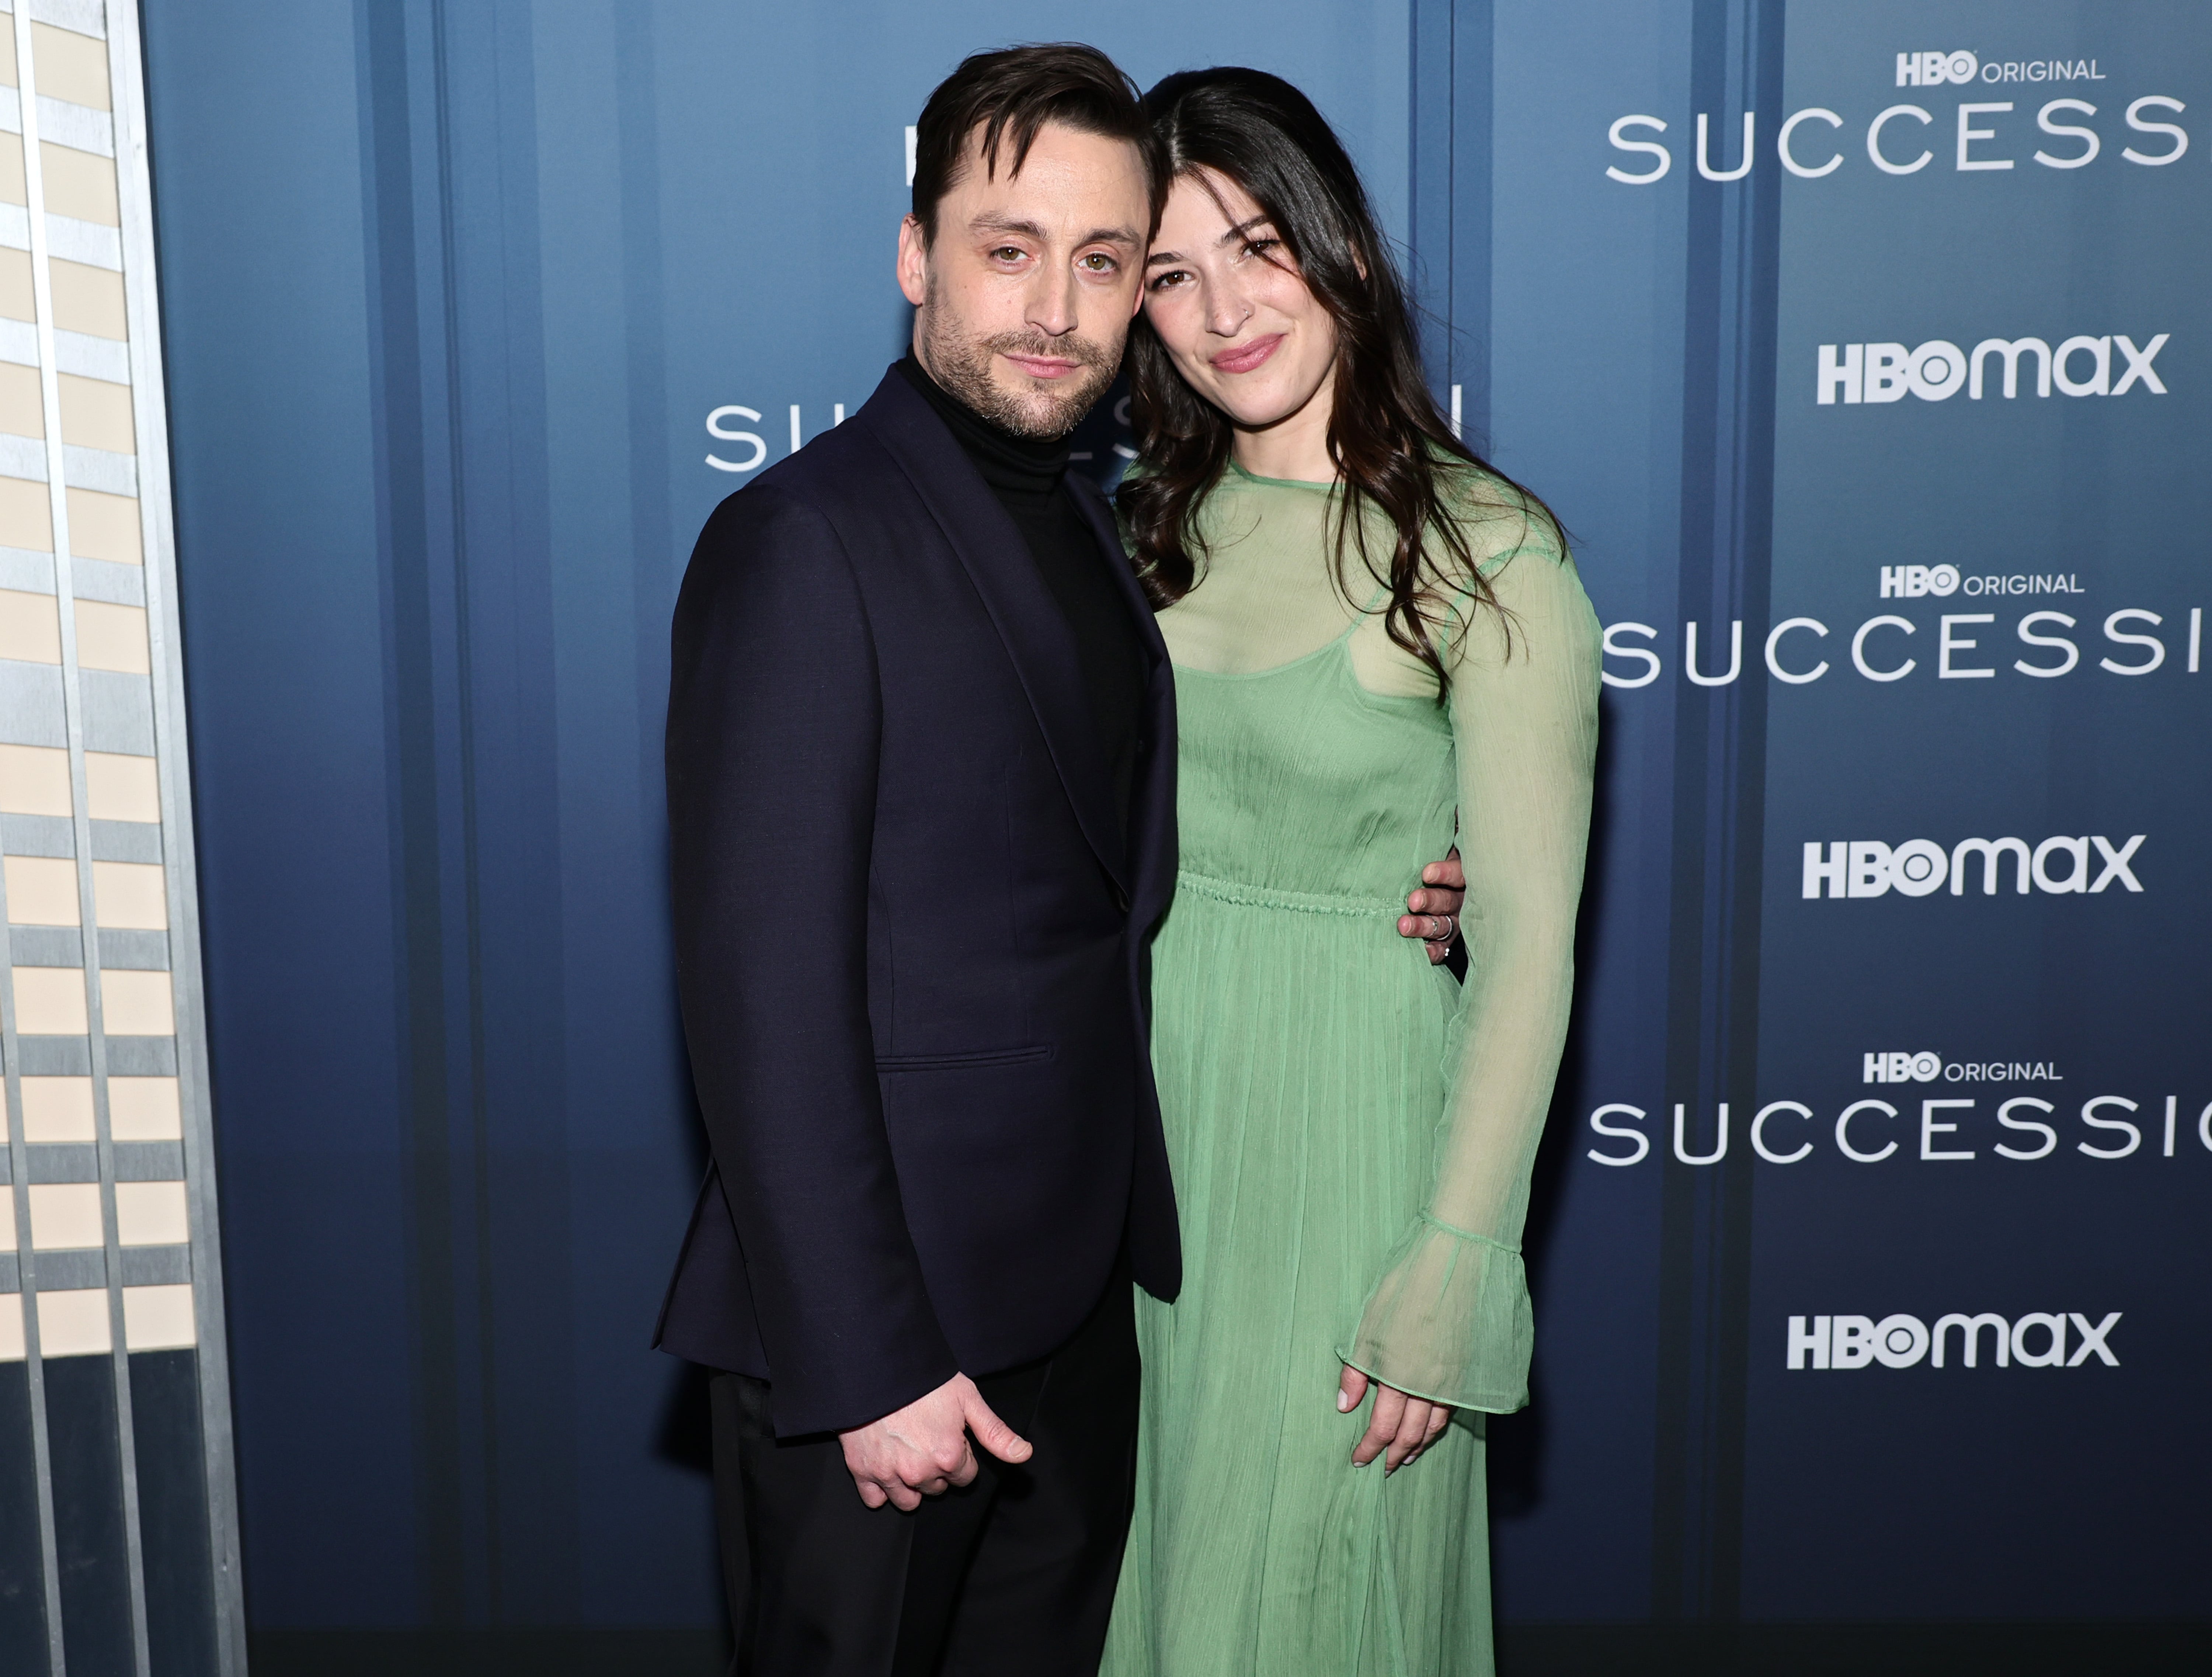 Cast and crew attend HBO's Succession Season 4 Premiere at Jazz